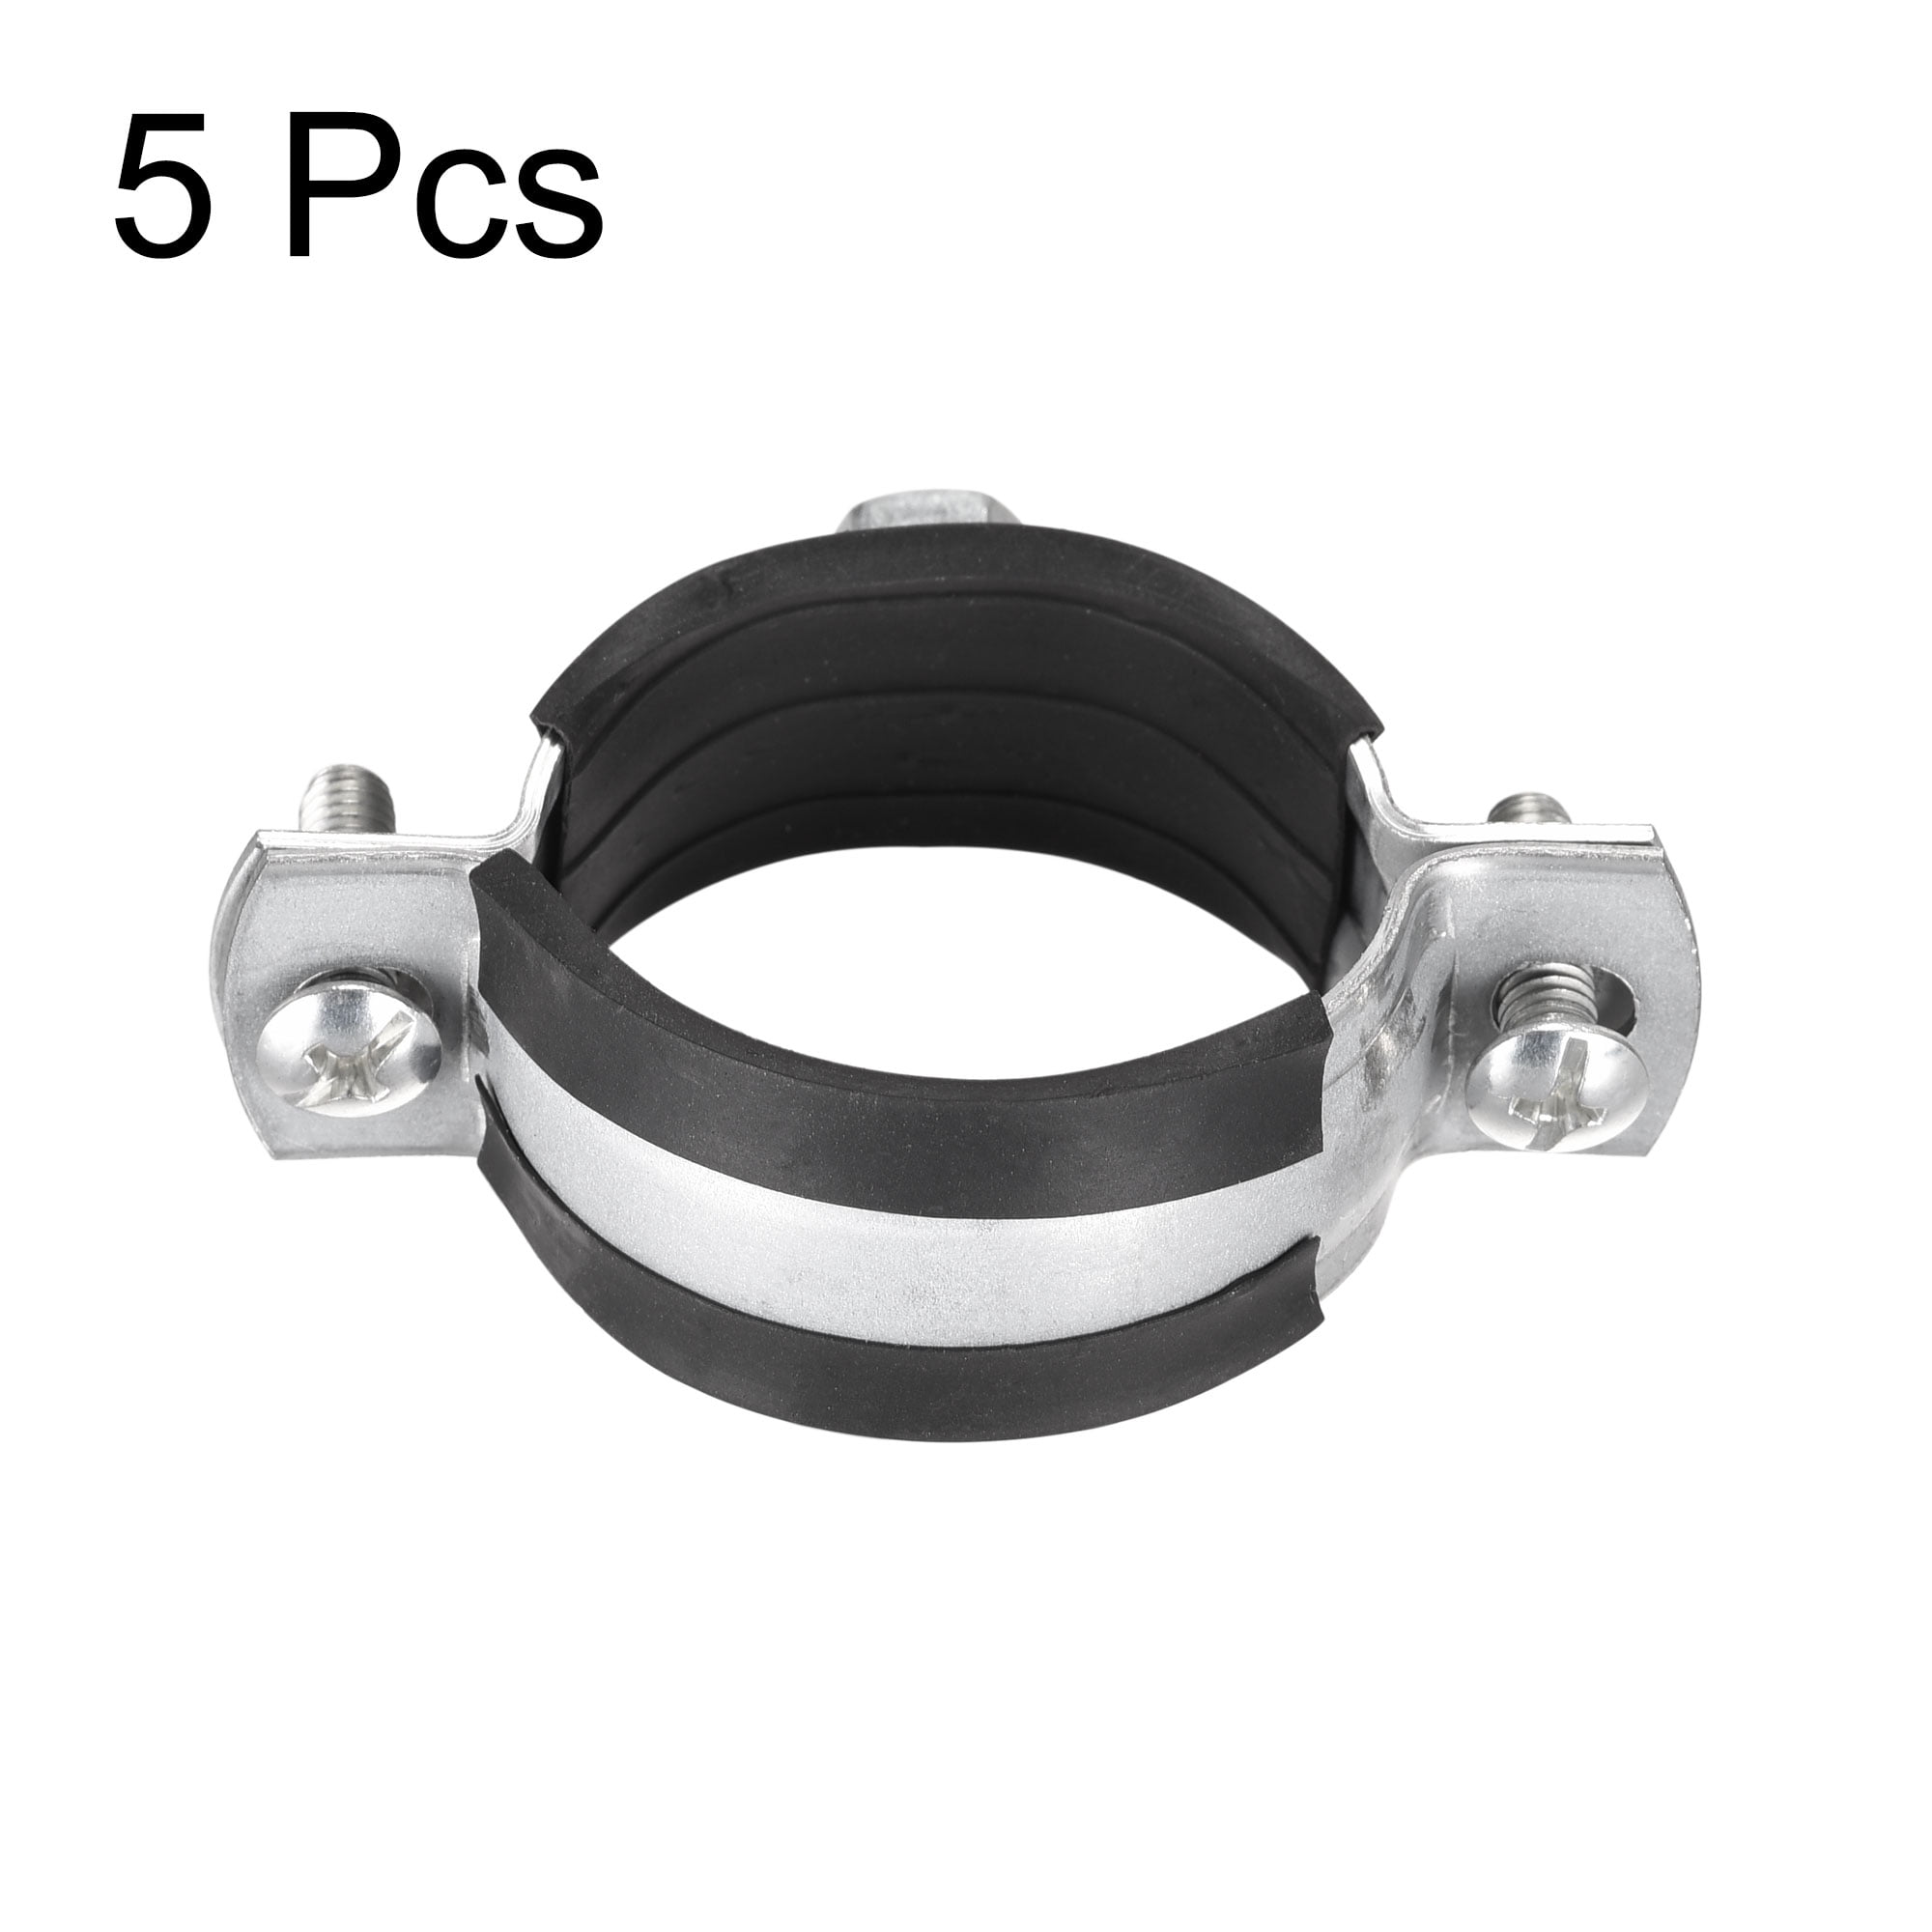 Pipe Bracket Clamp 1-9/16" Wall Ceiling Mount Iron Pipe Strap 5pcs 40mm 